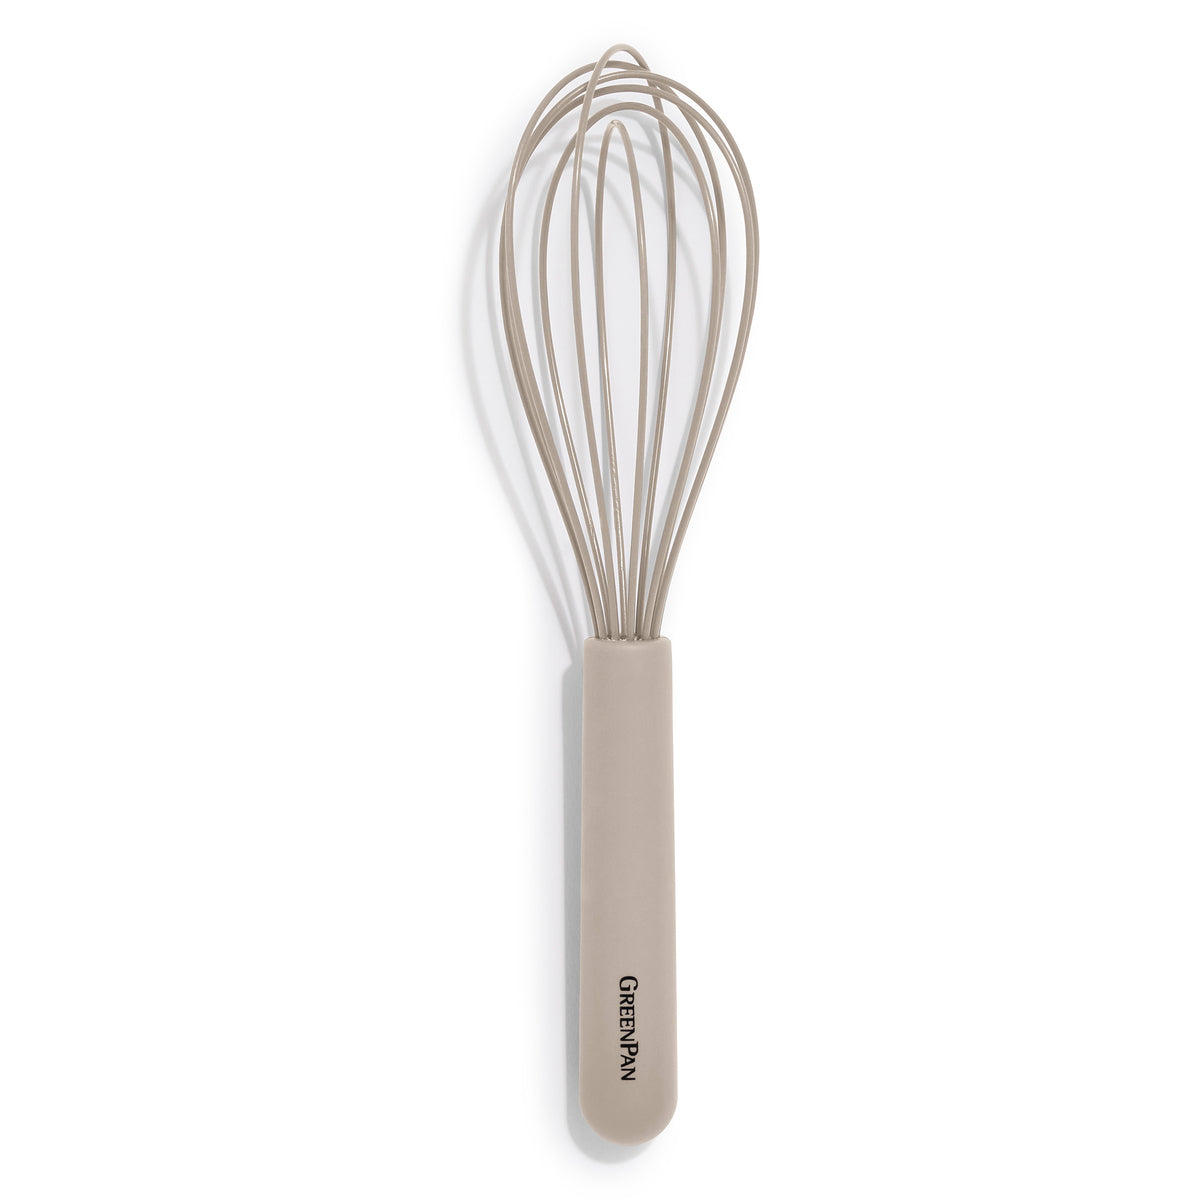 Triones Plastic Whisk, Small, Green